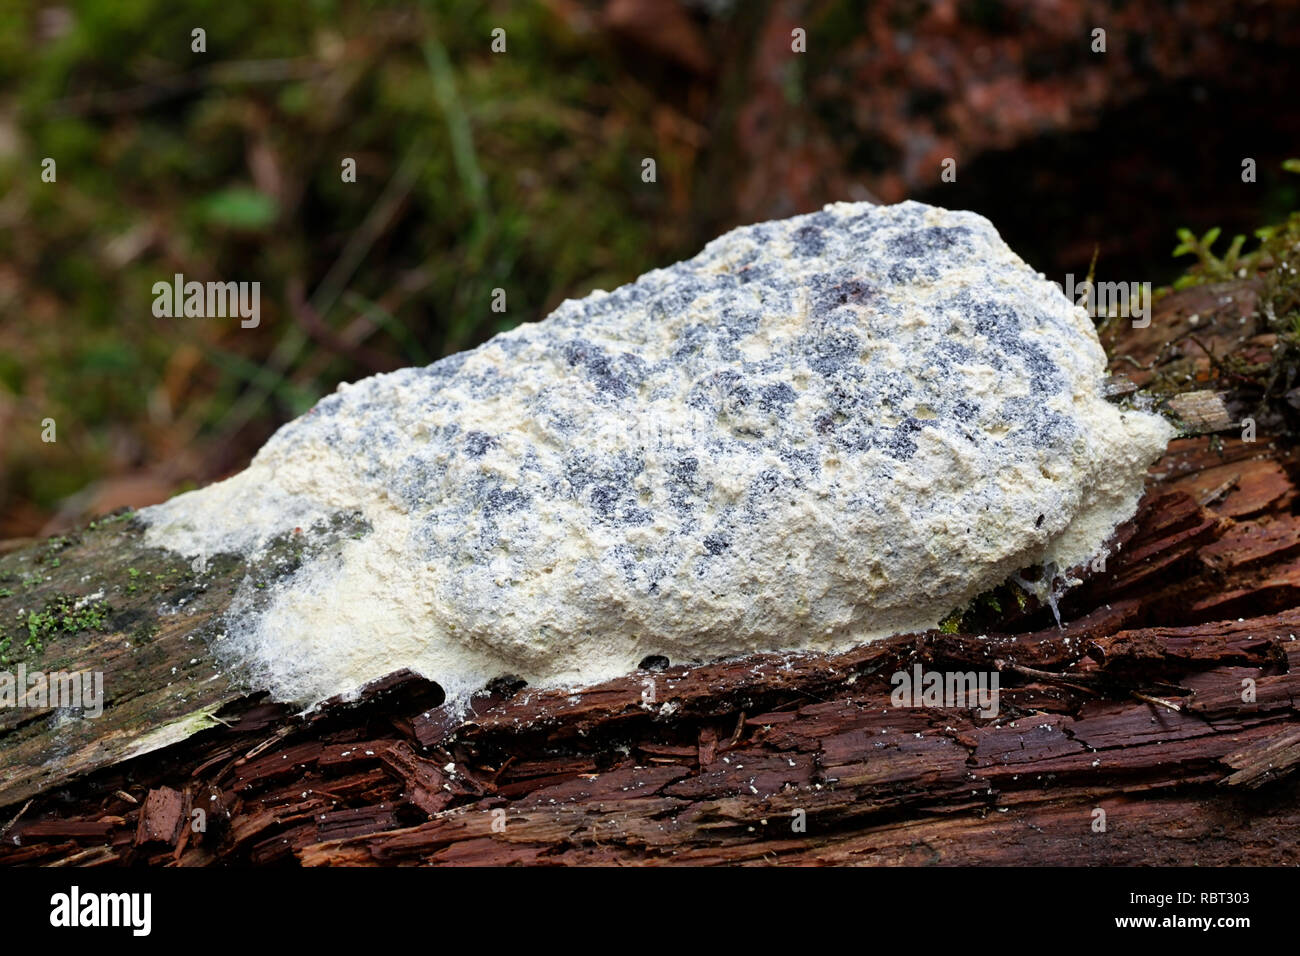 Fuligo septica var. candida, commonly called dog vomit slime mold, scrambled egg slime mold, or flowers of tan Stock Photo